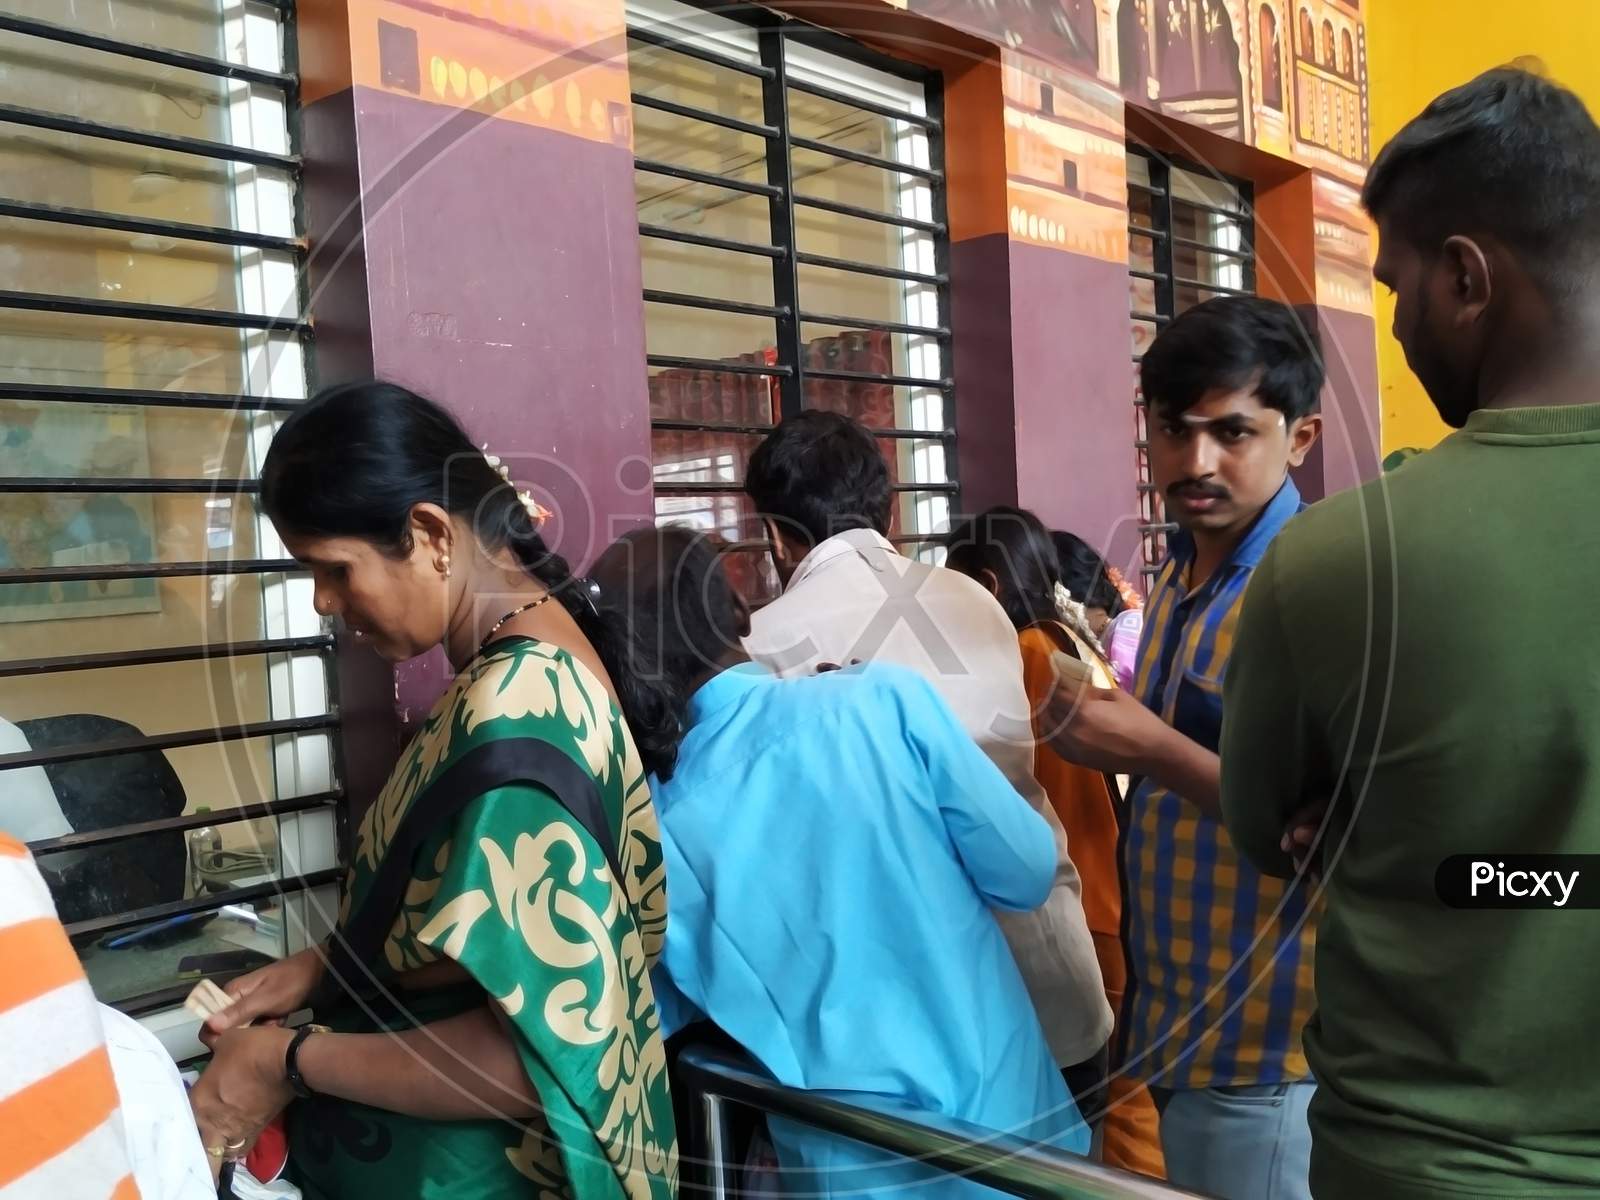 Interior Design Of Pandavapura Railway Station Ticket Counter And People In The Queue To Purchase Ticket